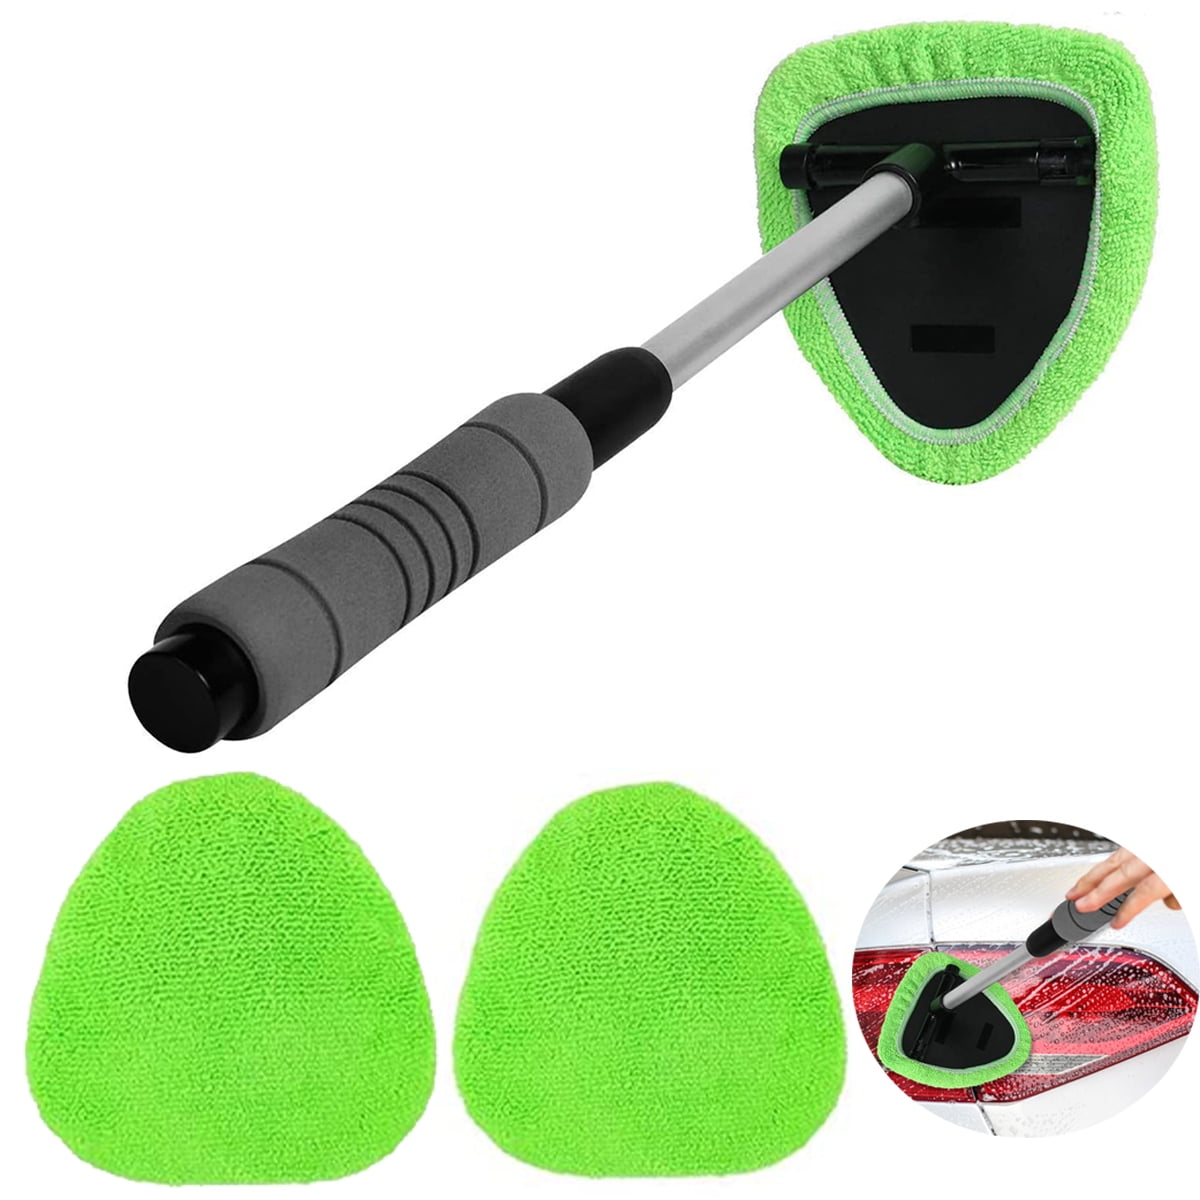 Ziciner Car Windshield Cleaner, Microfiber Auto Cleaning Wiper with  Aluminum Extendable Handle and 2 Washable Reusable Cloth Pad Head,  Universal